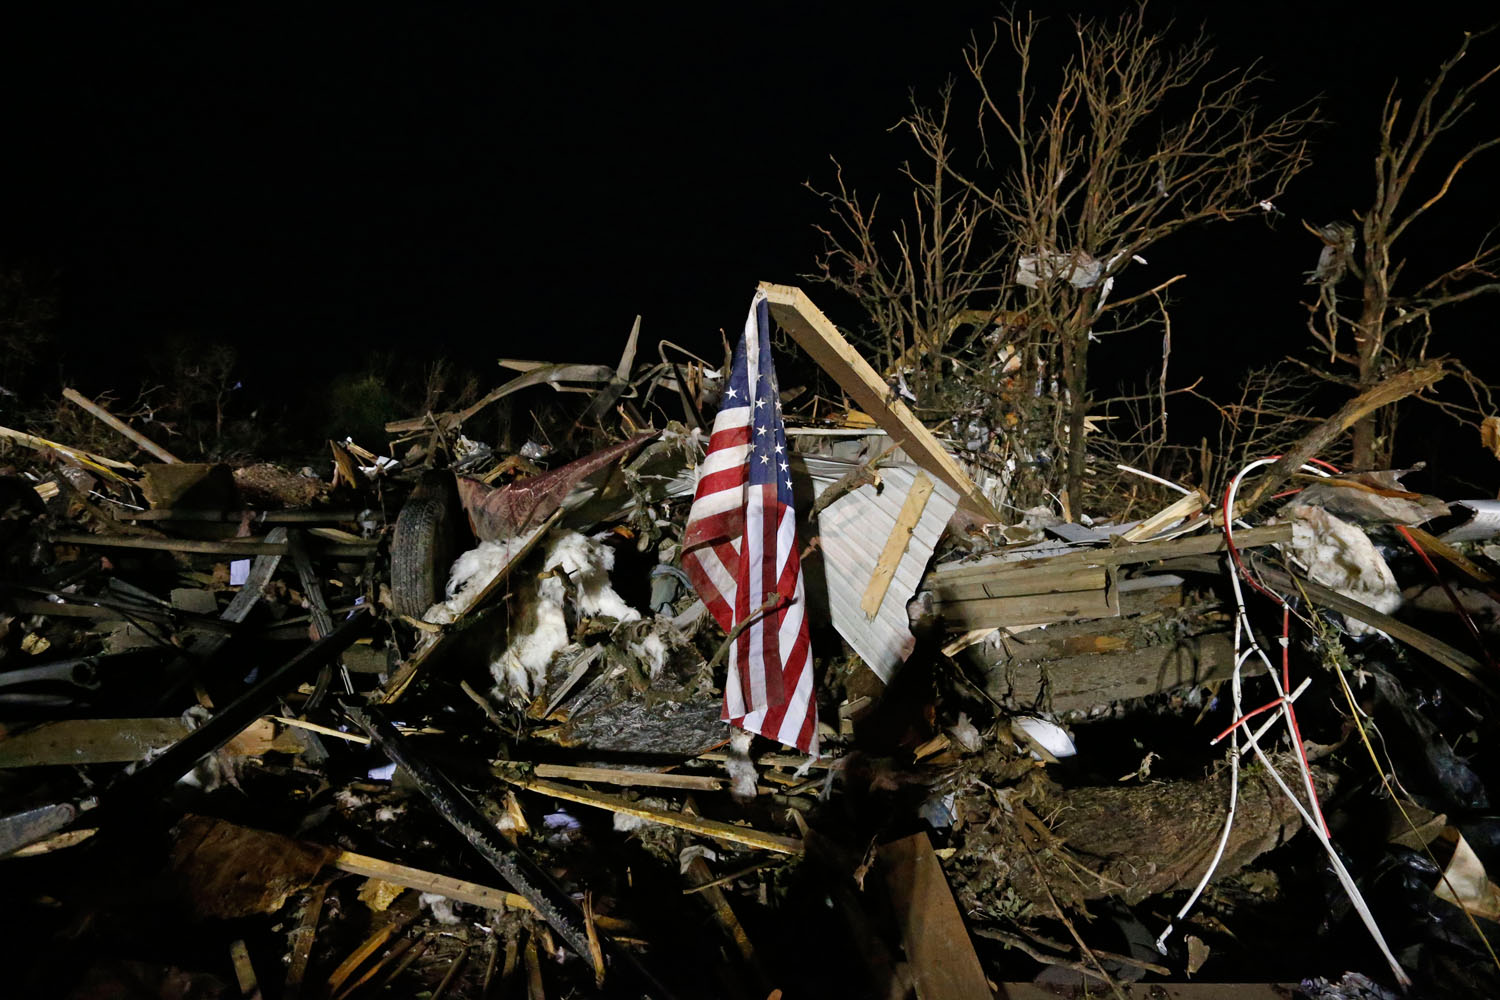 May 19, 2013. A flag flies in the debris of a mobile home after a tornado struck a mobile home park near Dale, Okla.